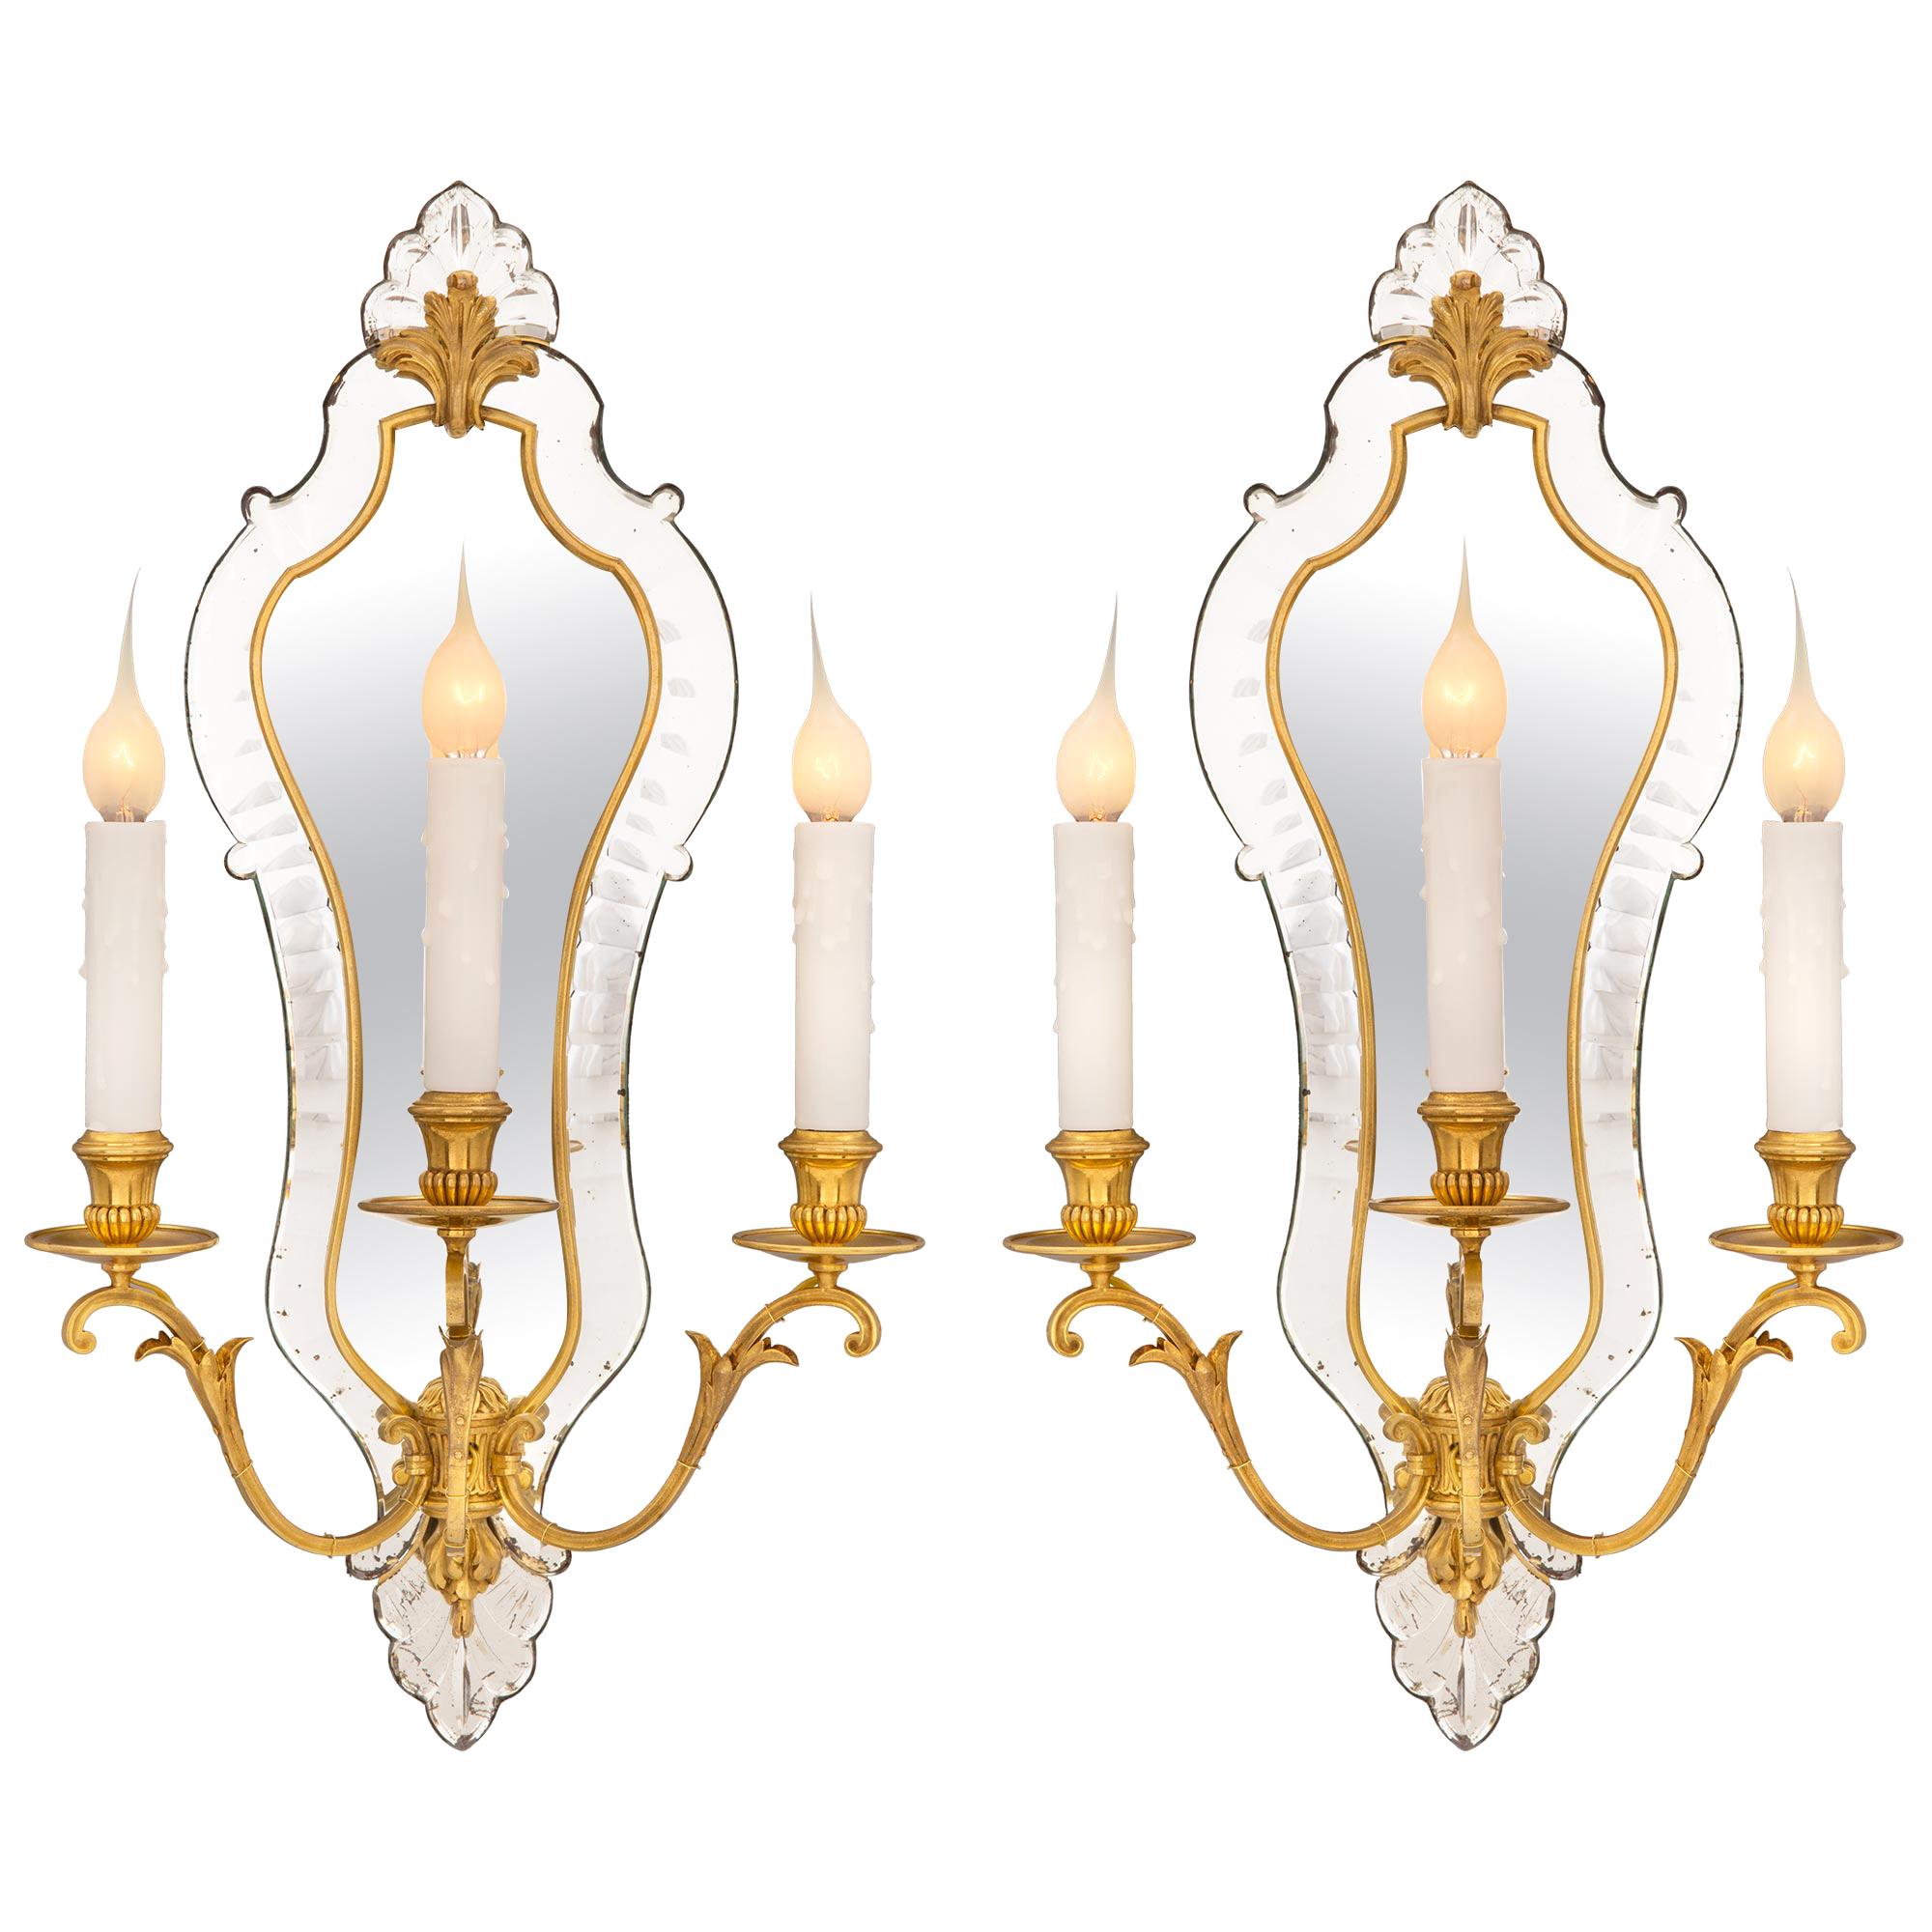 Pair of French Turn-of-the-Century Venetian Style Ormolu and Mirrored Sconces For Sale